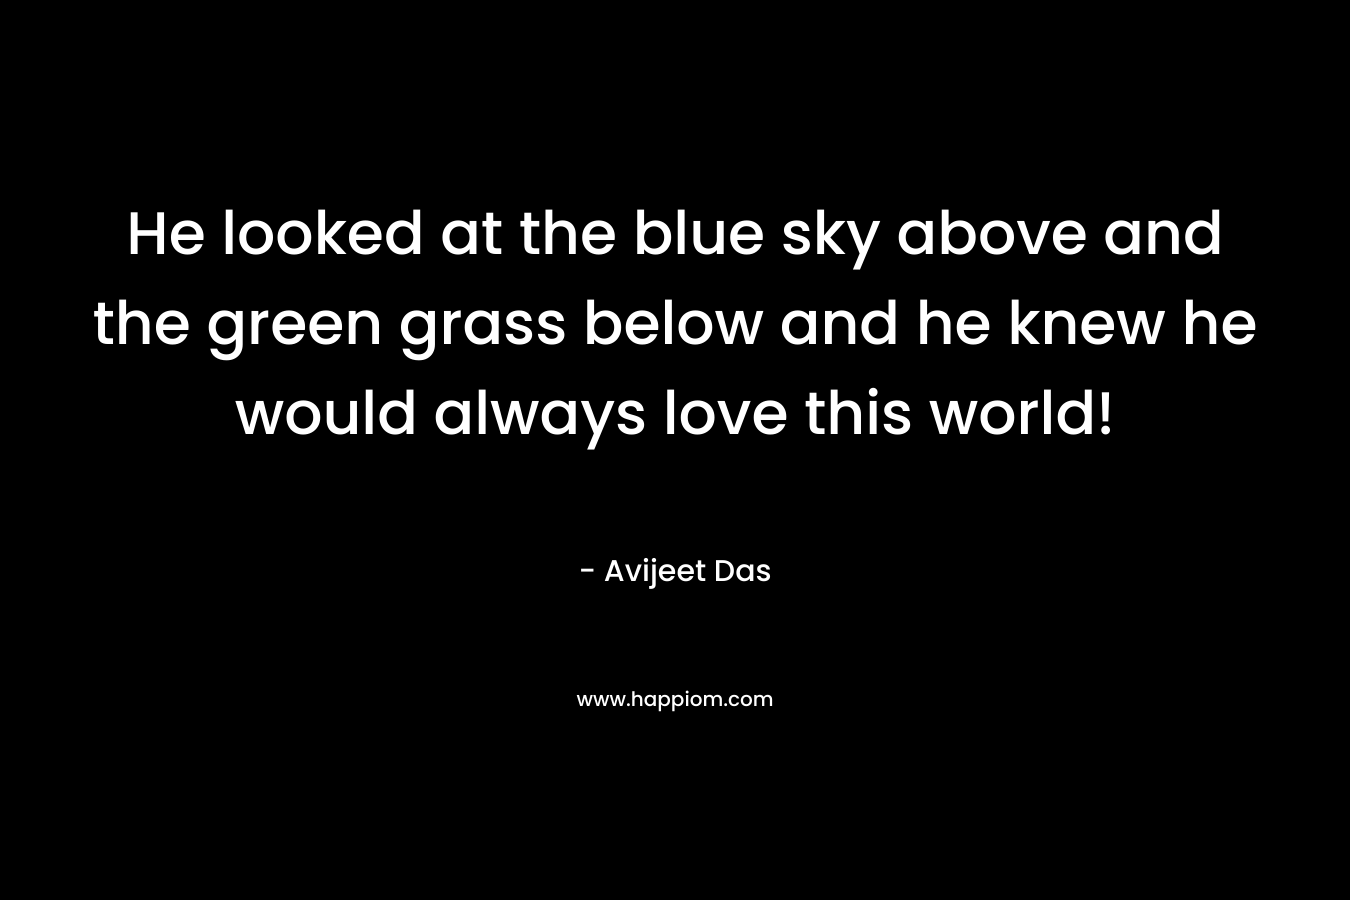 He looked at the blue sky above and the green grass below and he knew he would always love this world!